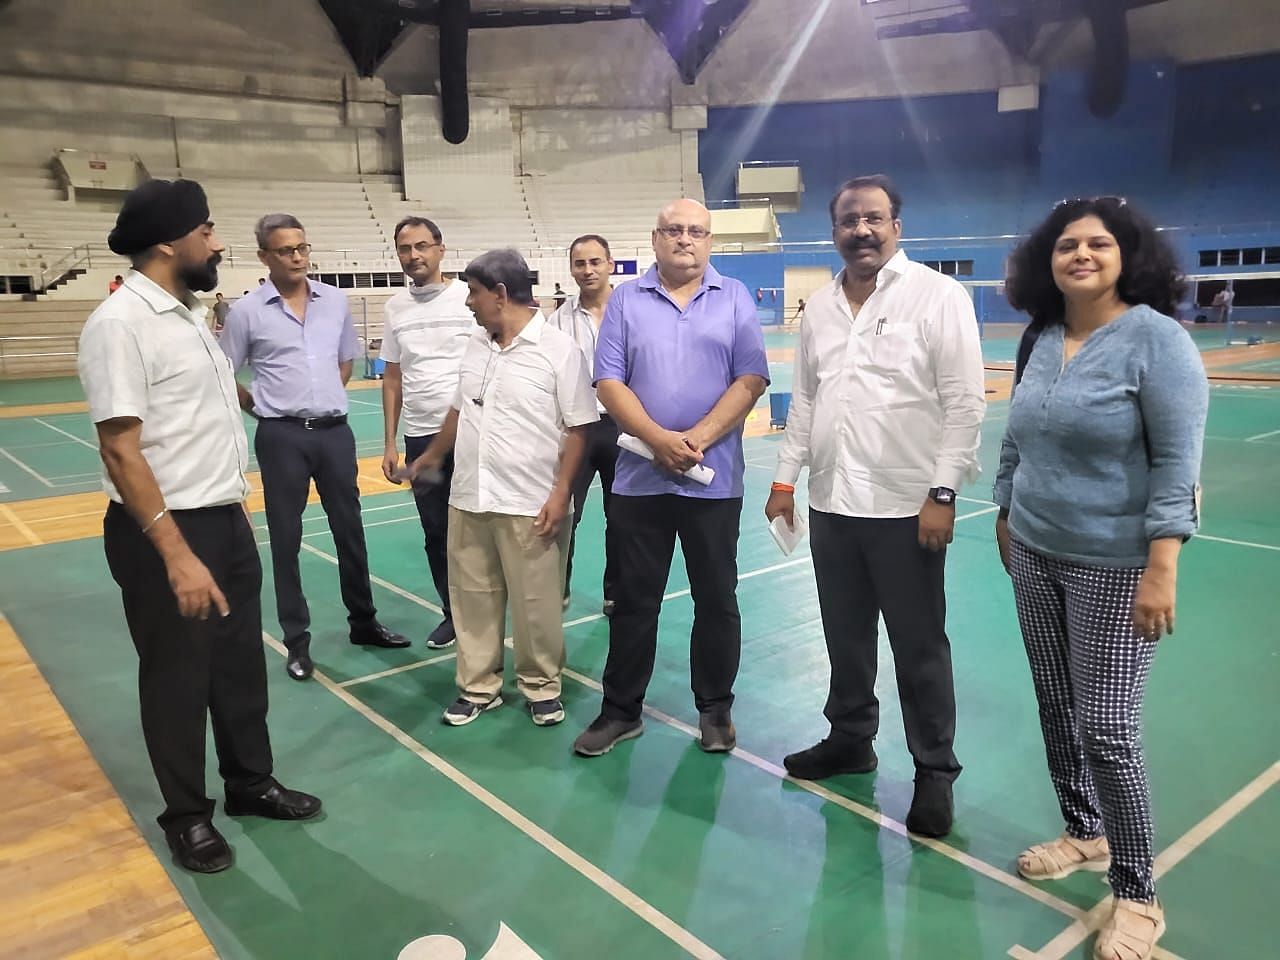 The Badminton Association of India delegation doing recce at the Mankapur Divisional Sports Complex in Nagpur on Friday. (Pic credit: NDBA)